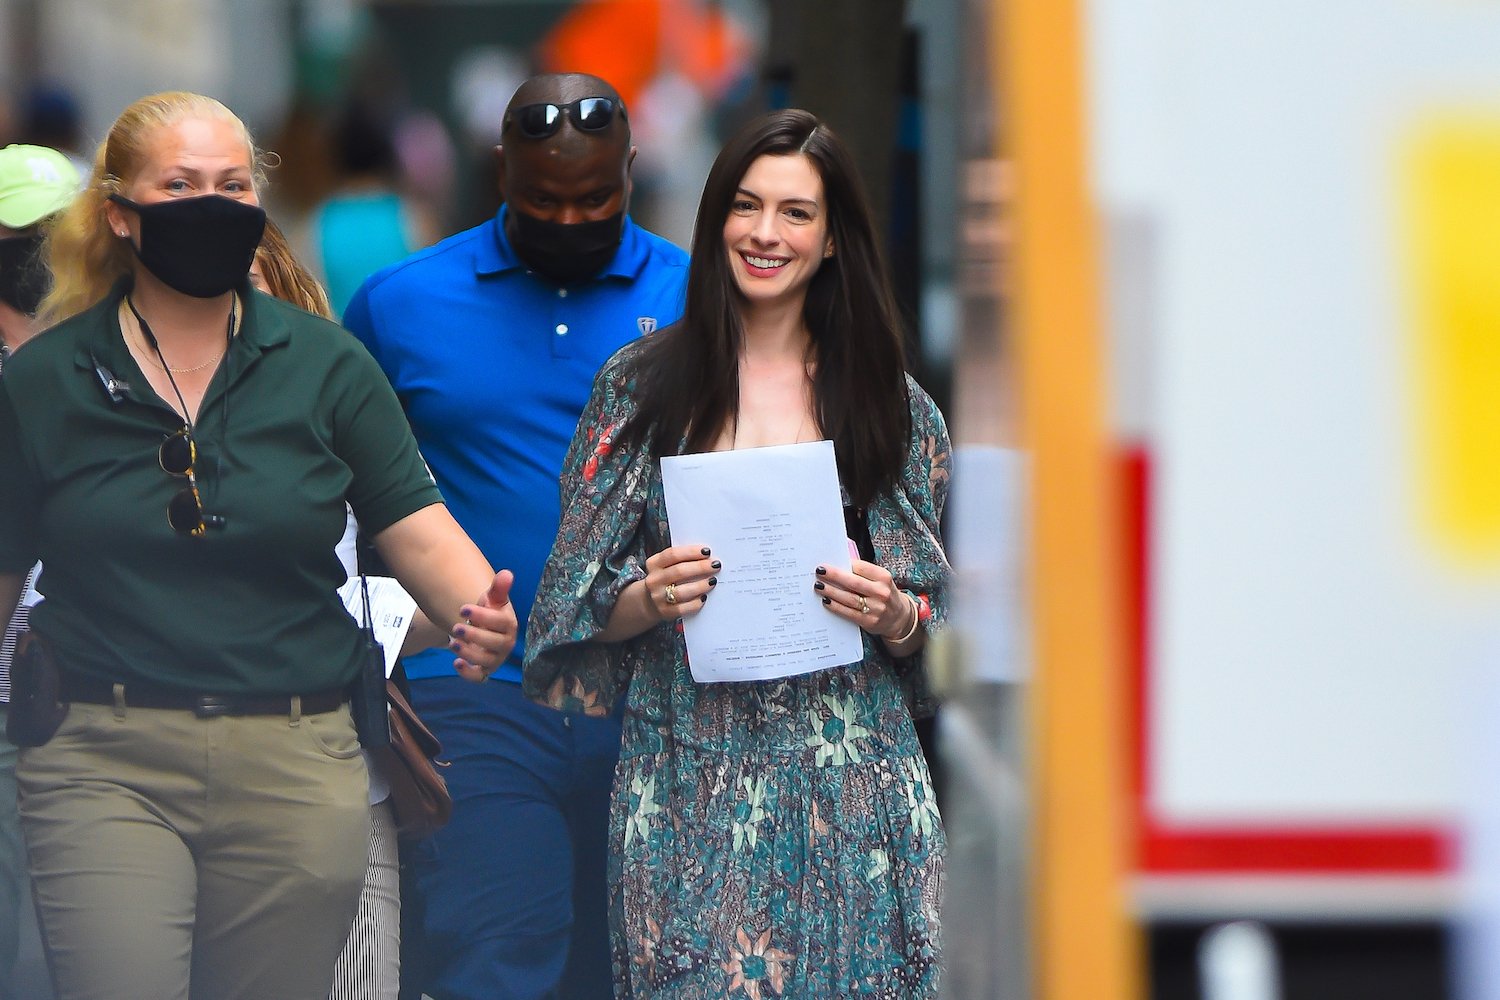 Anne Hathaway Was Seen Filming This Miniseries in New York